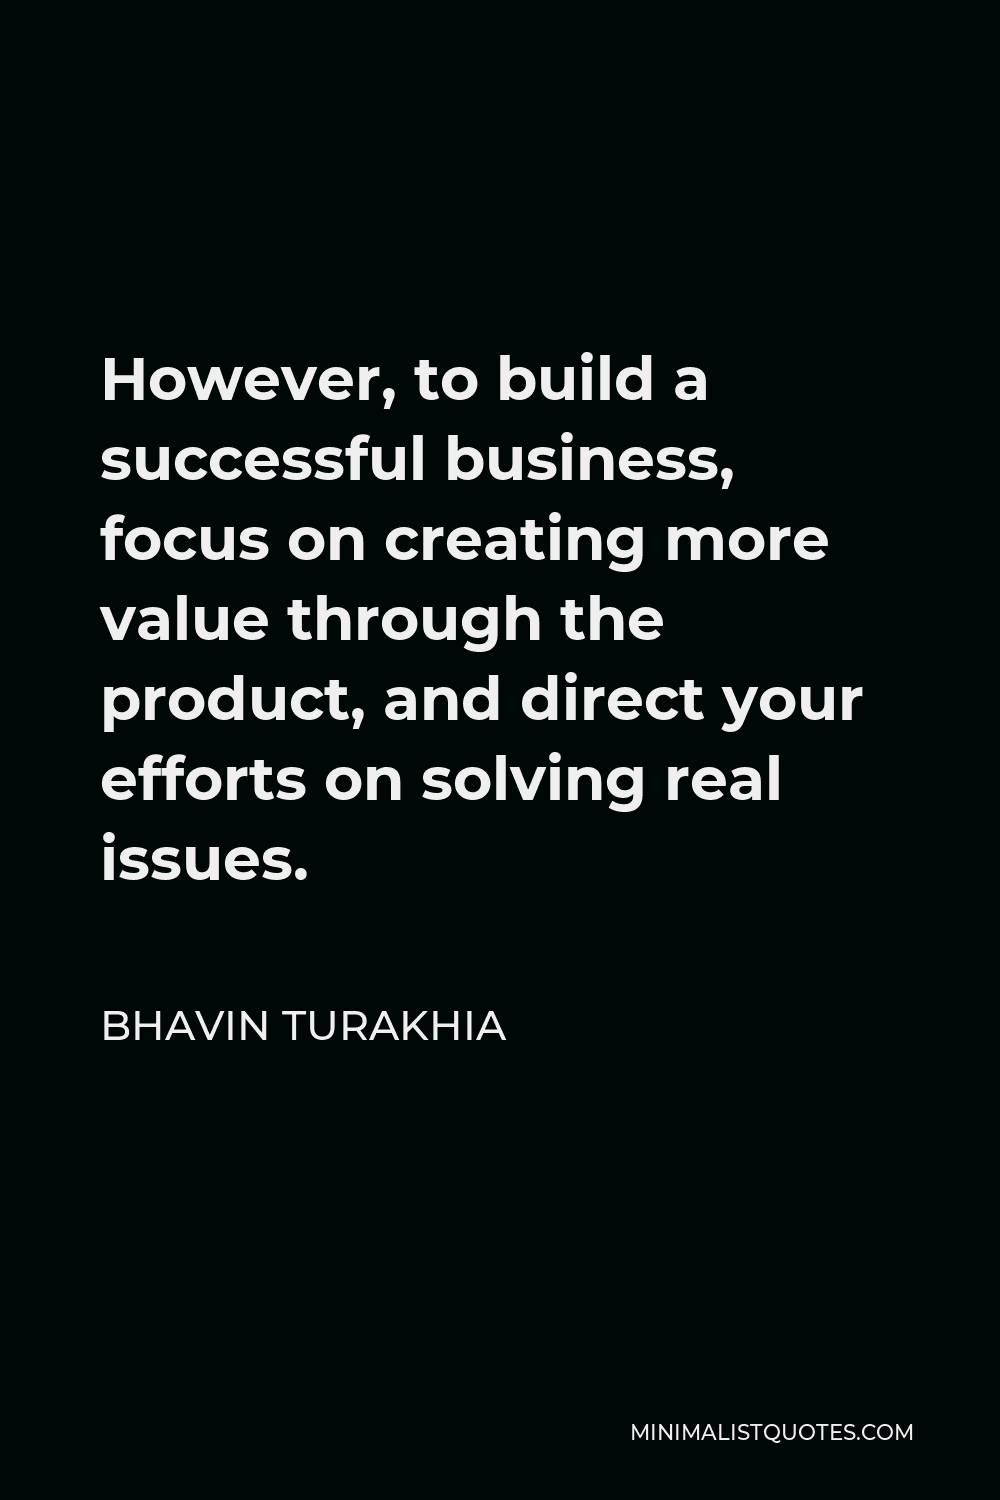 Bhavin Turakhia Quote - However, to build a successful business, focus on creating more value through the product, and direct your efforts on solving real issues.